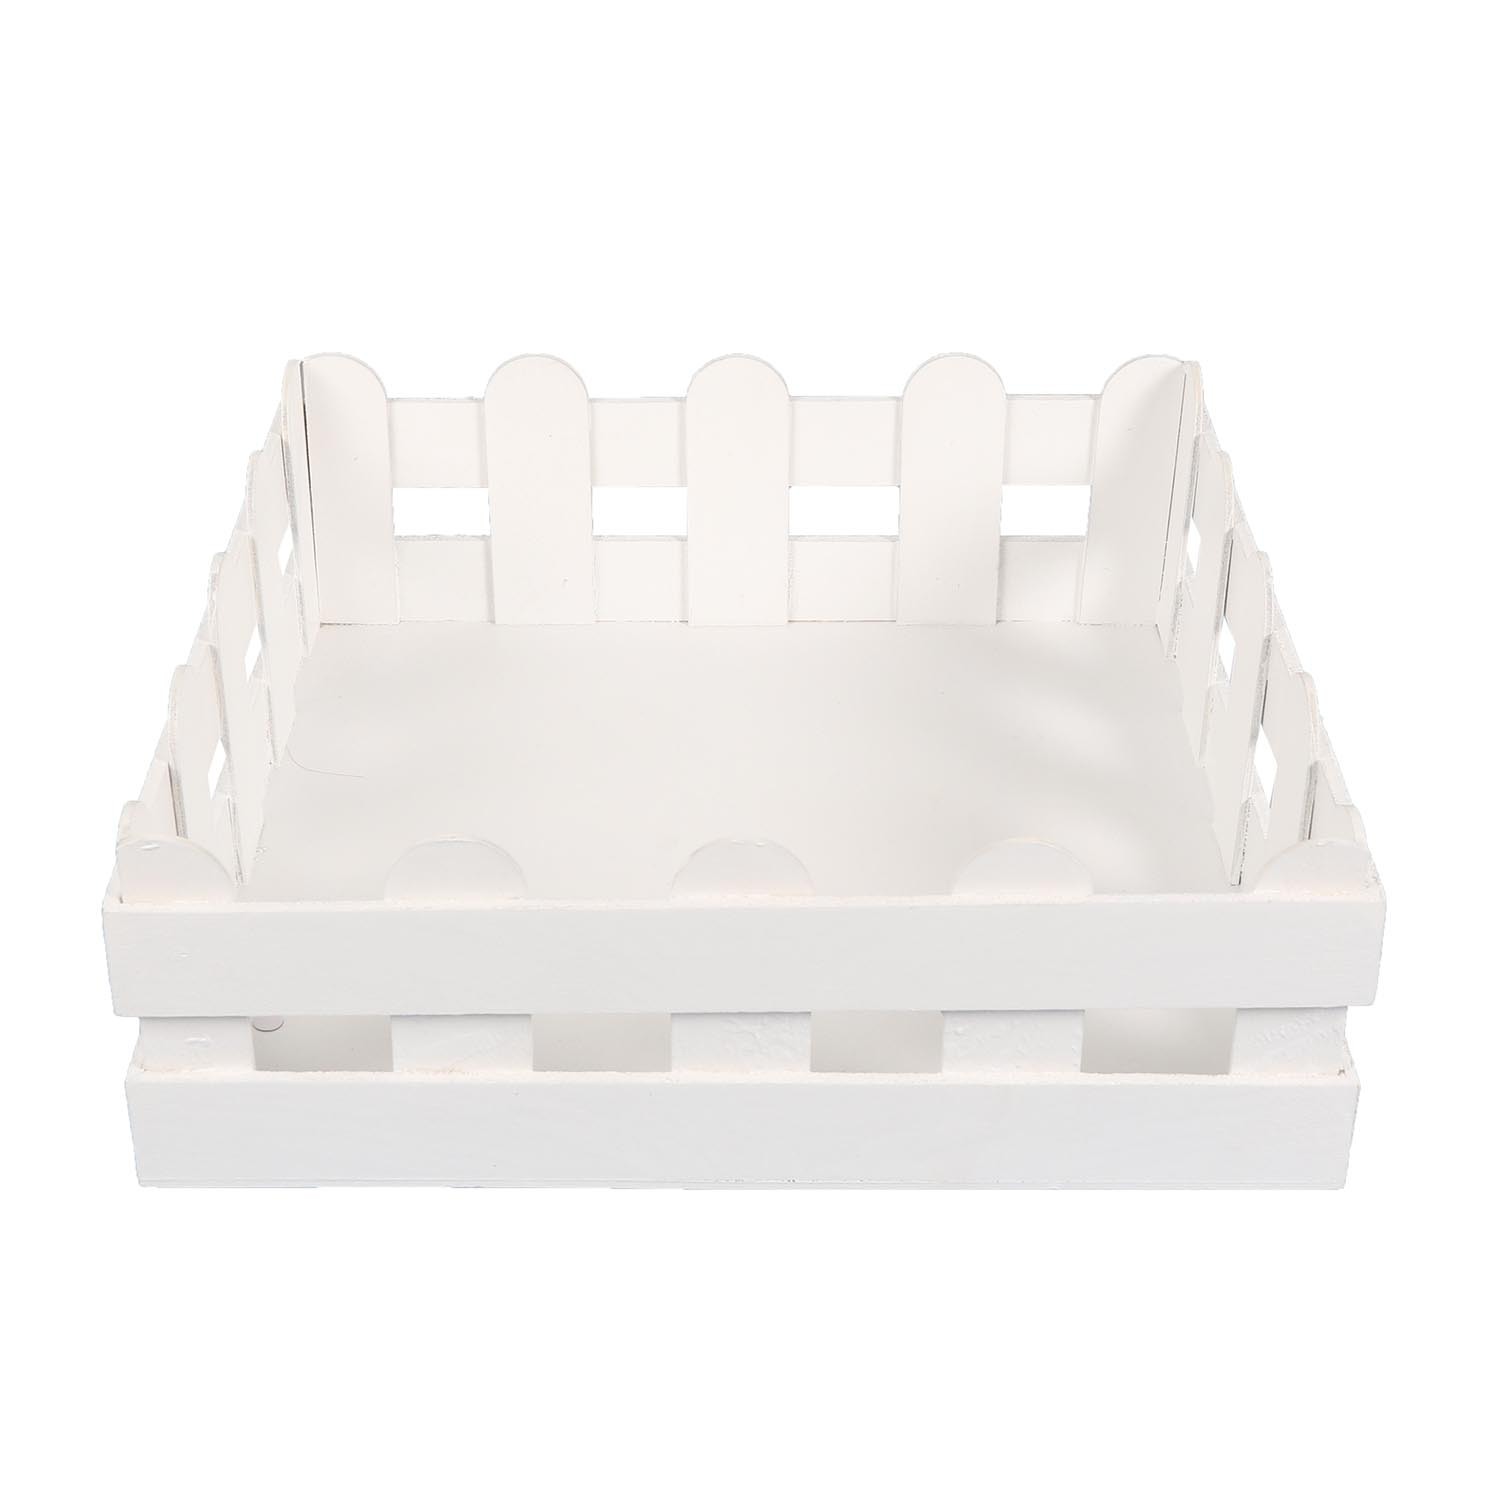 White Wooden Fence Crate - White Image 1